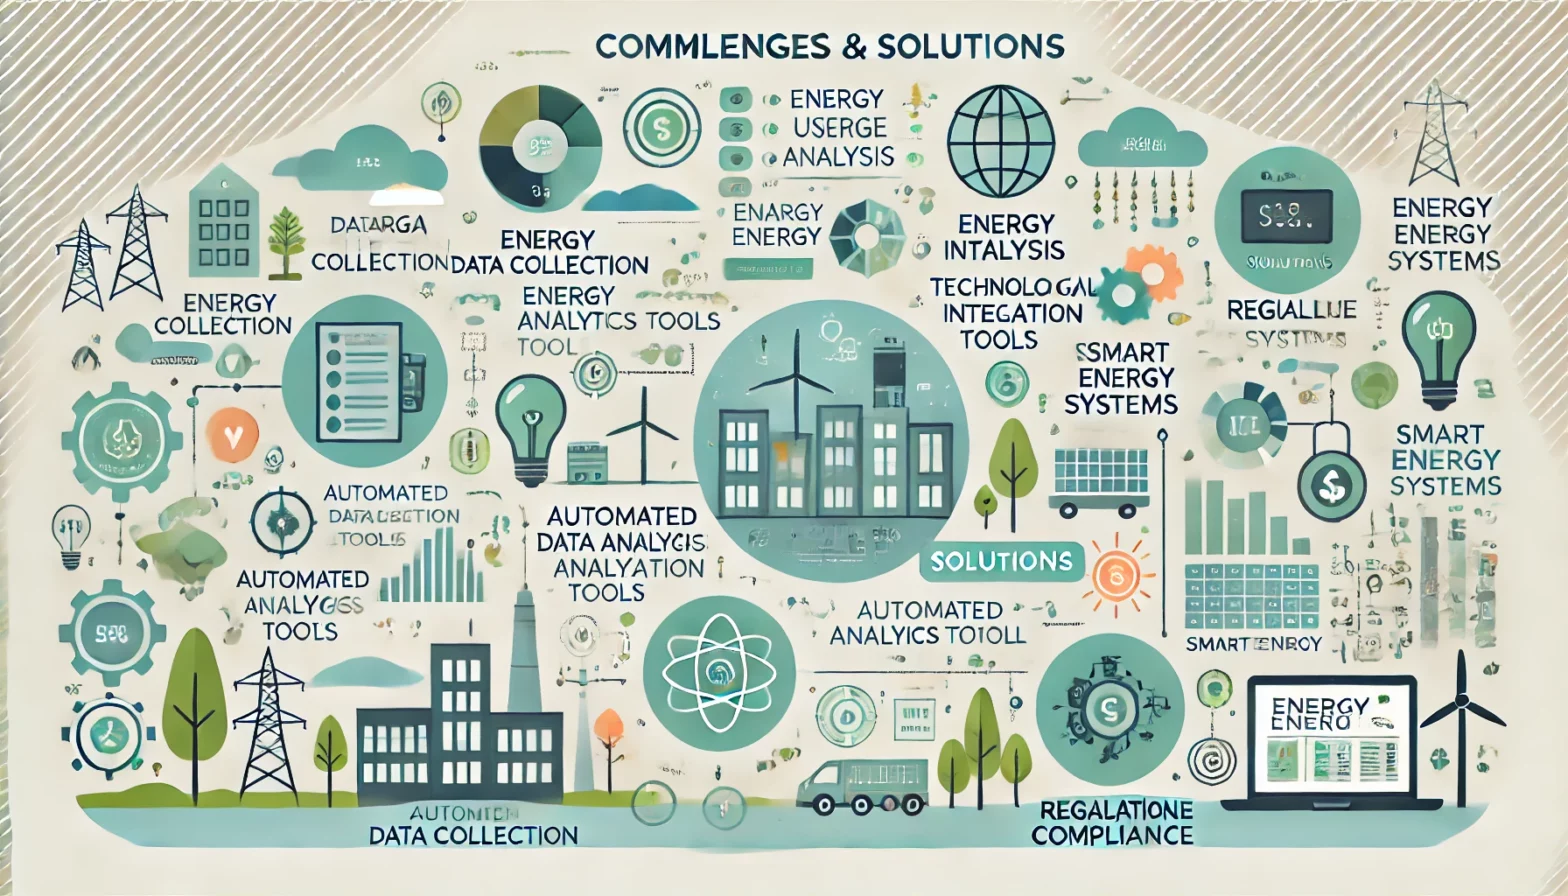 Infographic illustrating common challenges and solutions in energy auditing for sustainable energy, featuring icons and text with a clean design and light background.